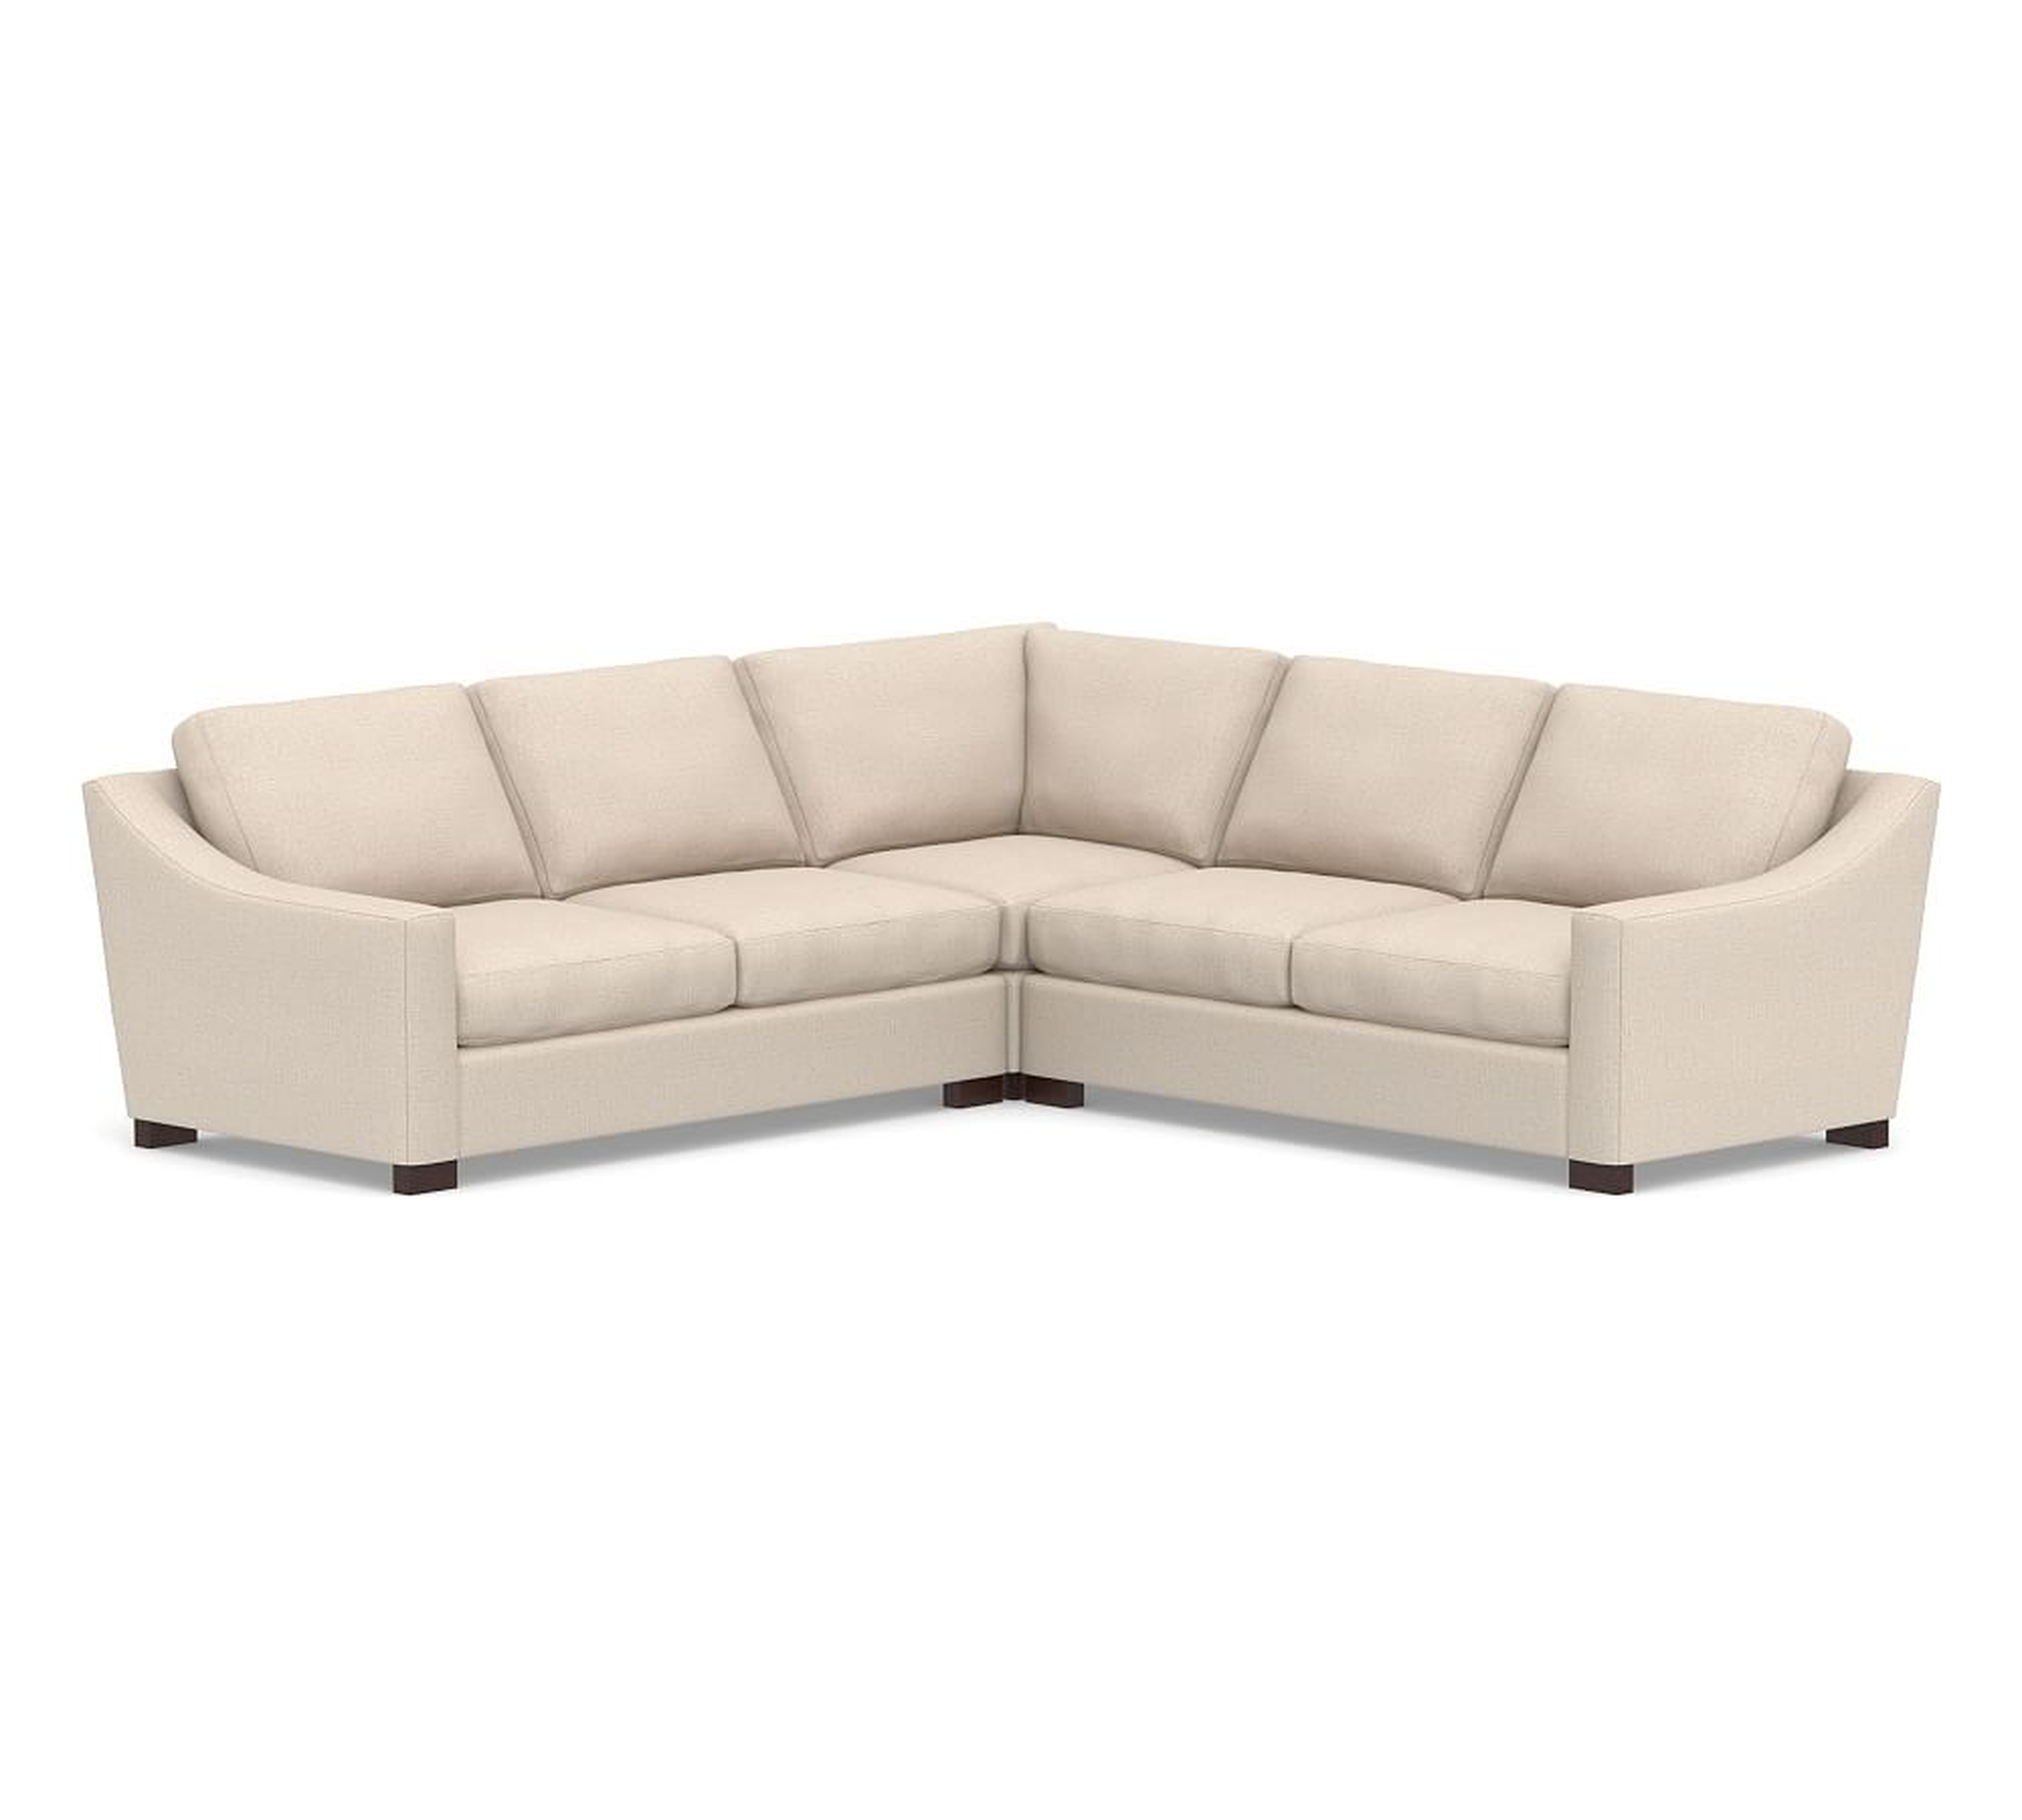 Turner Slope Arm Upholstered 3-Piece L-Shaped Corner Sectional, Down Blend Wrapped Cushions, Performance Everydaylinen(TM) by Crypton(R) Home Oatmeal - Pottery Barn